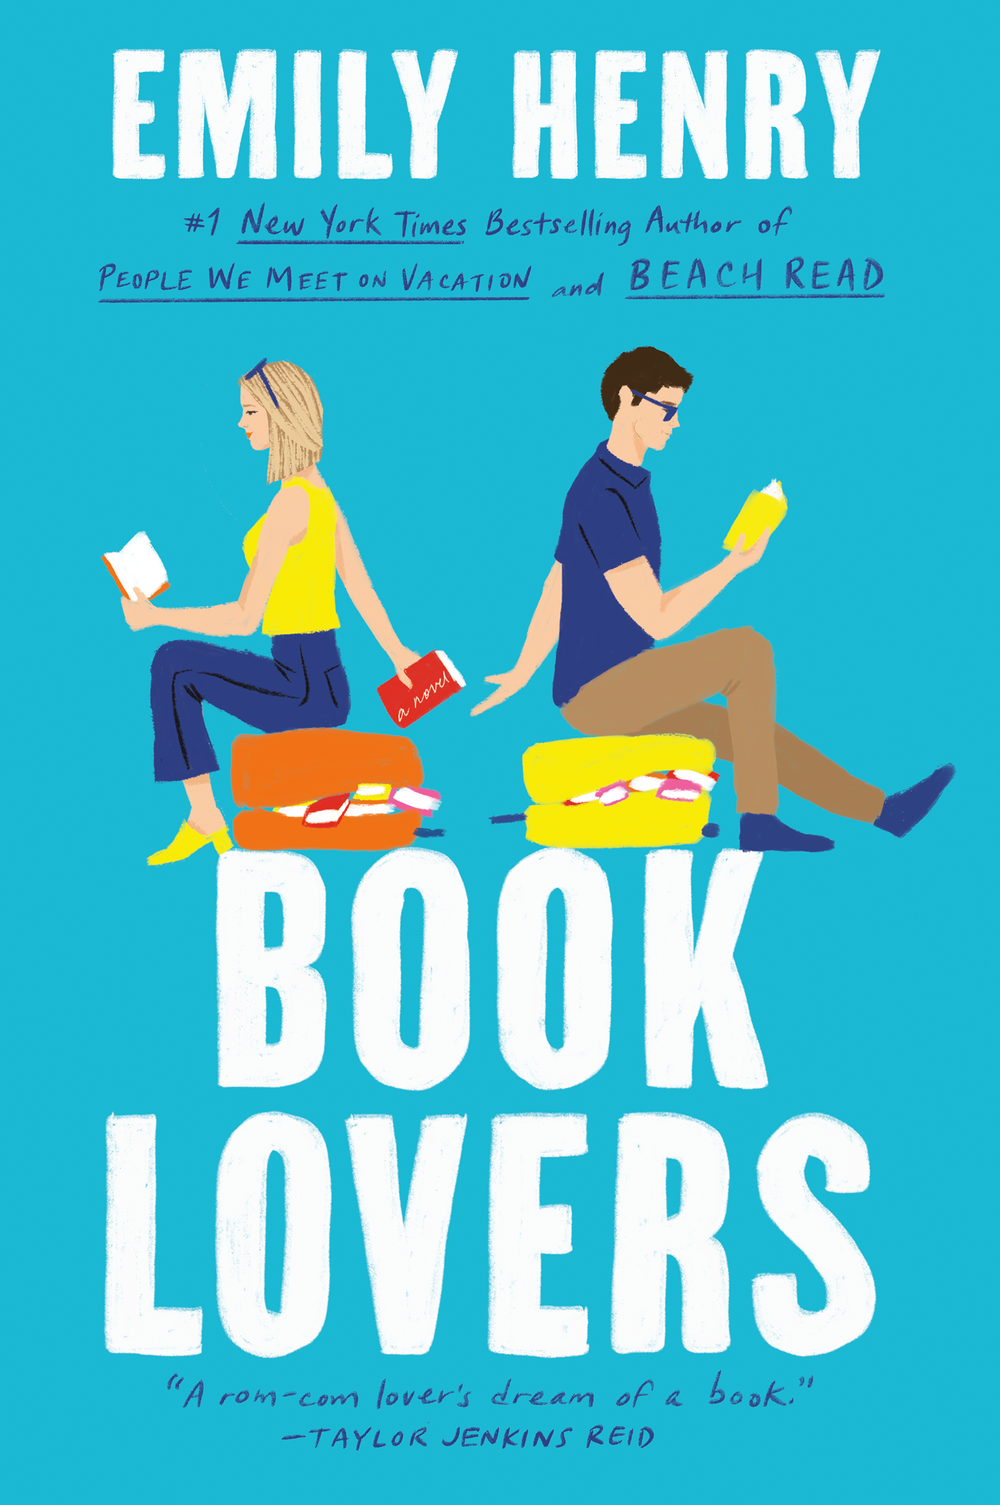 book lovers by emily henry book review